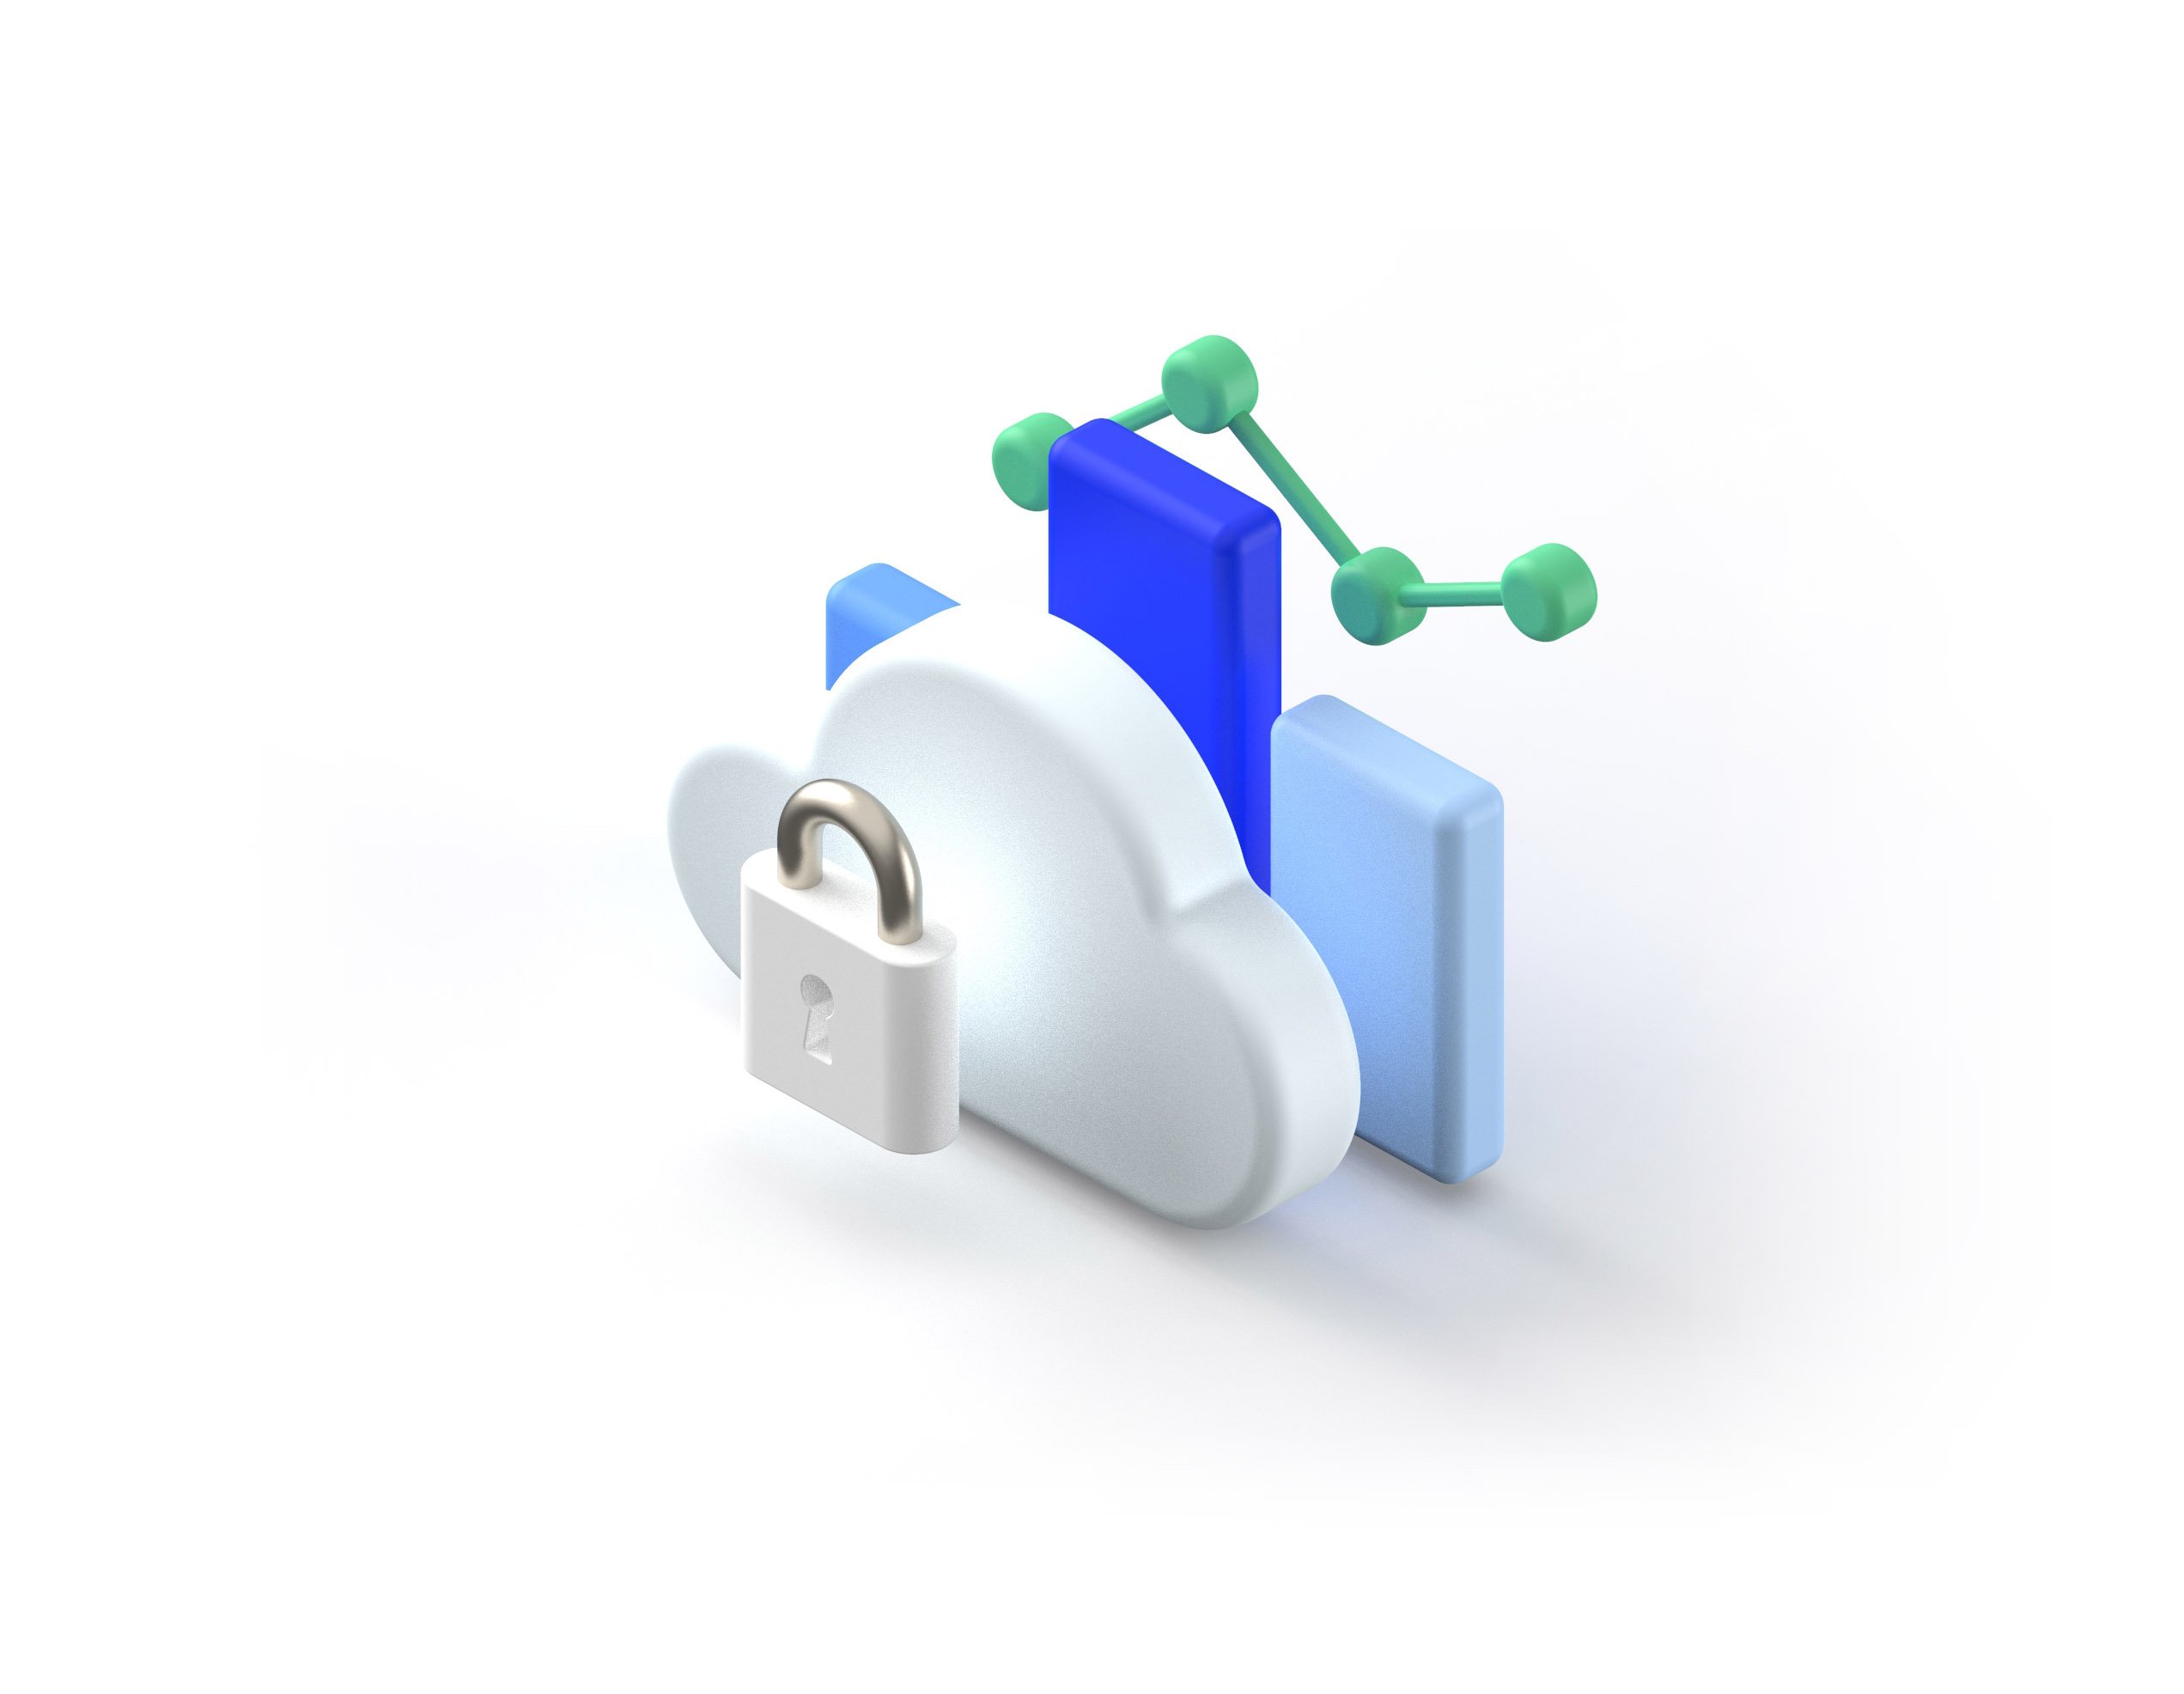 lock and cloud icon + Science lab equipment